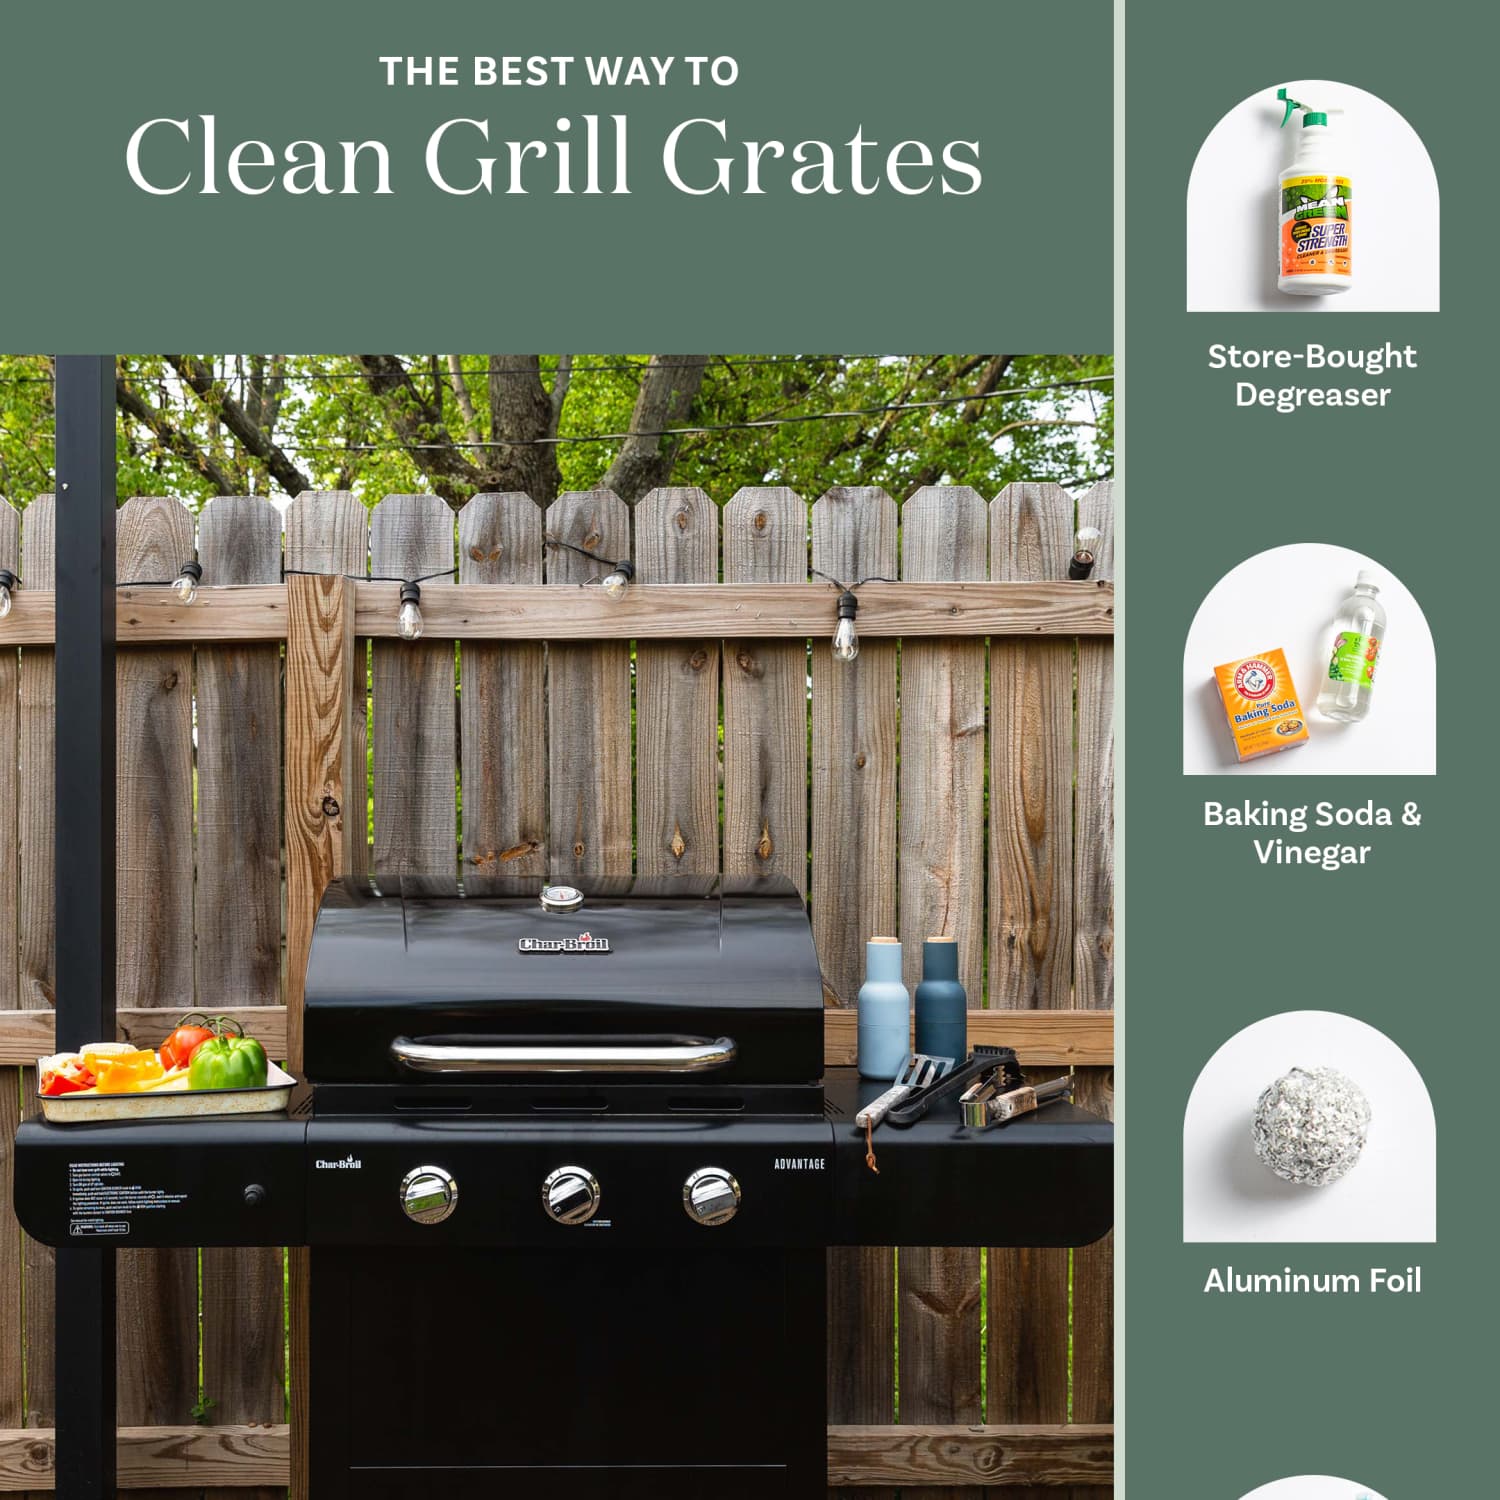 Maintaining Your Grill and Keeping It Clean (and then cooking an